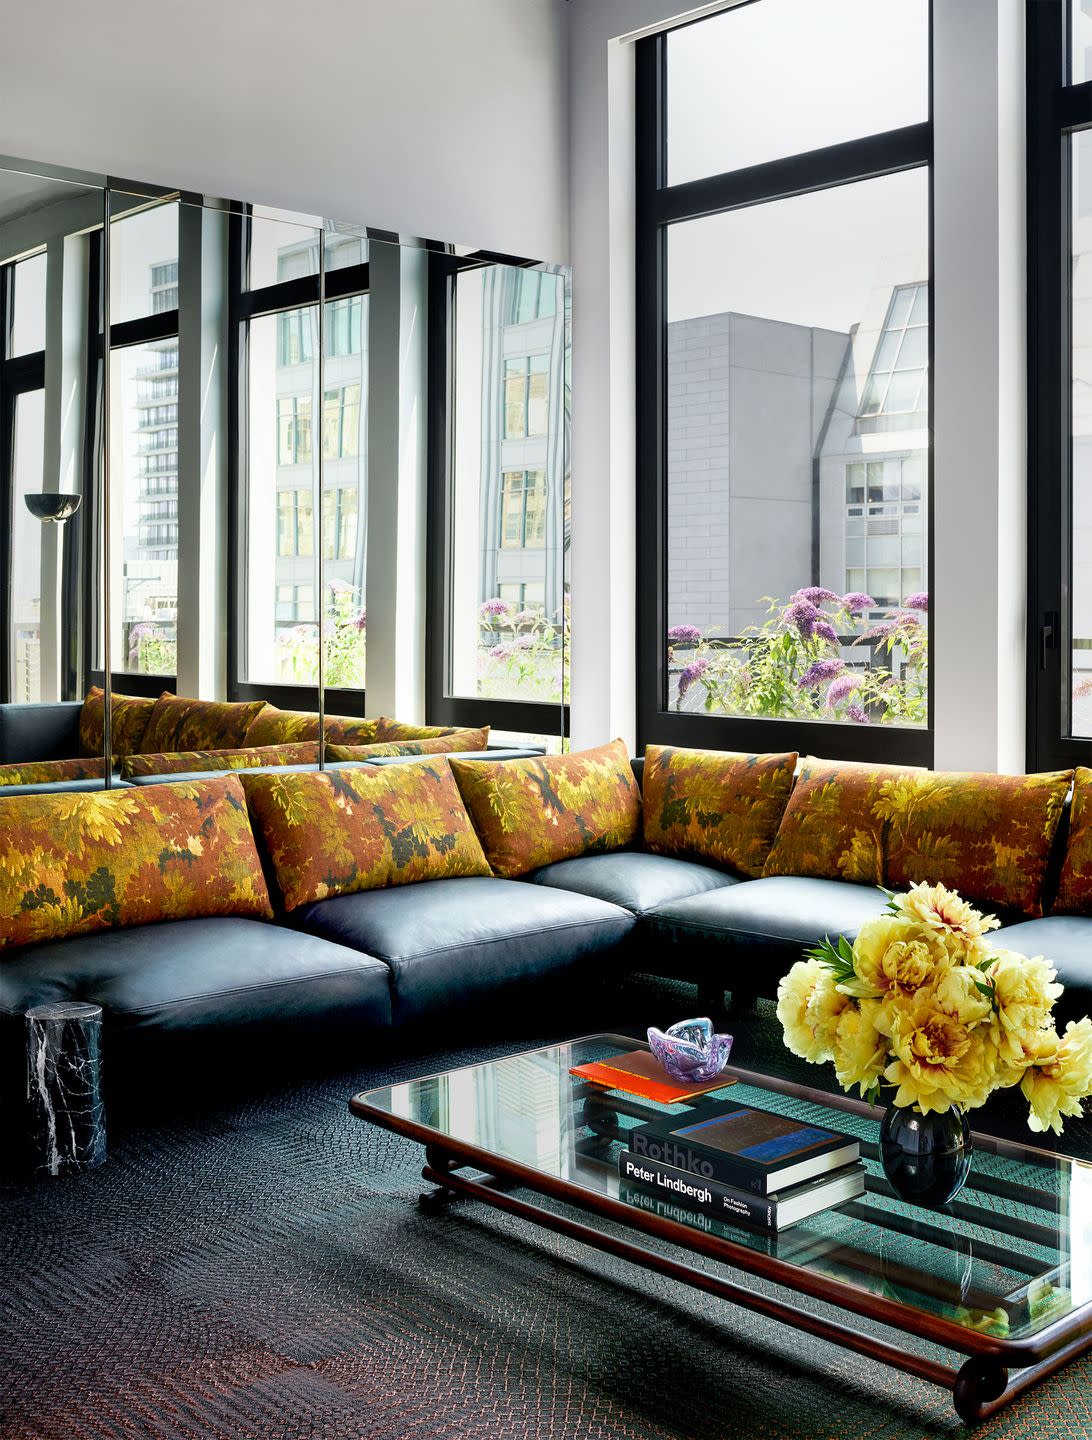 a living room framed by mirrors and windows has a sectional with black leather seat cushions and flowered fabric back cushions, a low glass cocktail framed in curved wood, and a dark patterned rug